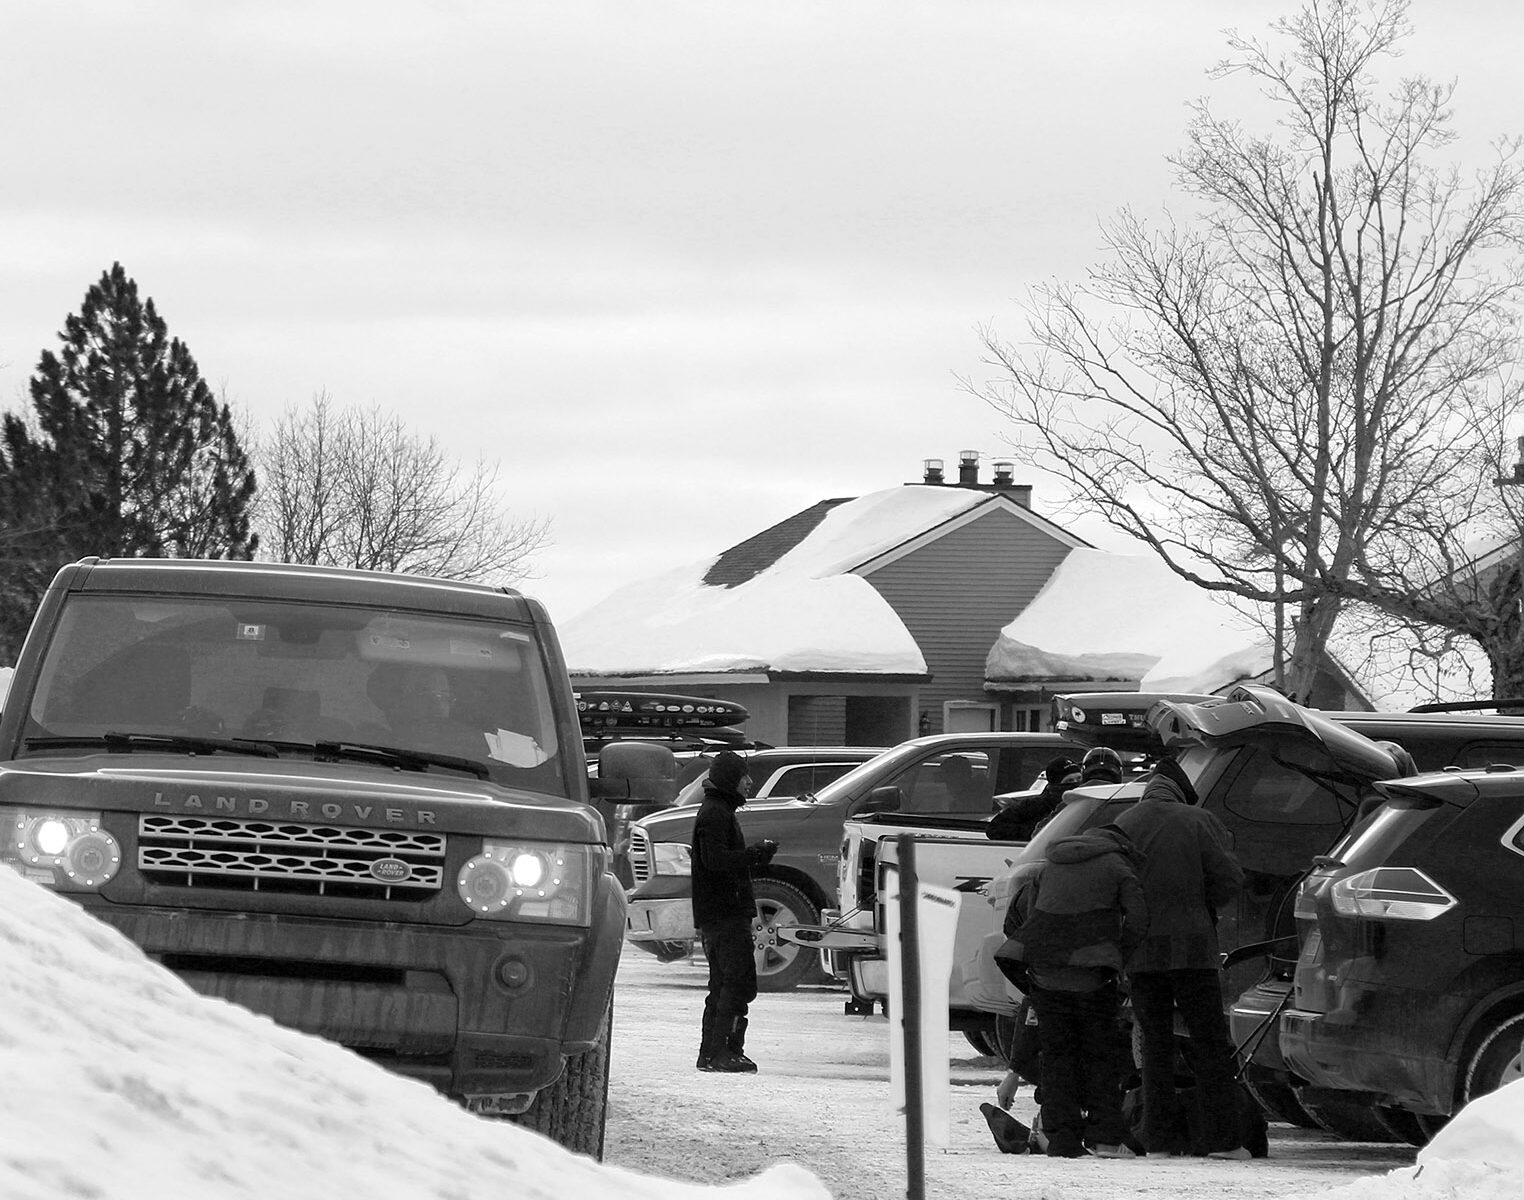 An image from a parking area in the Village on a typical ski day in March at Bolton Valley Ski Resort in Vermont